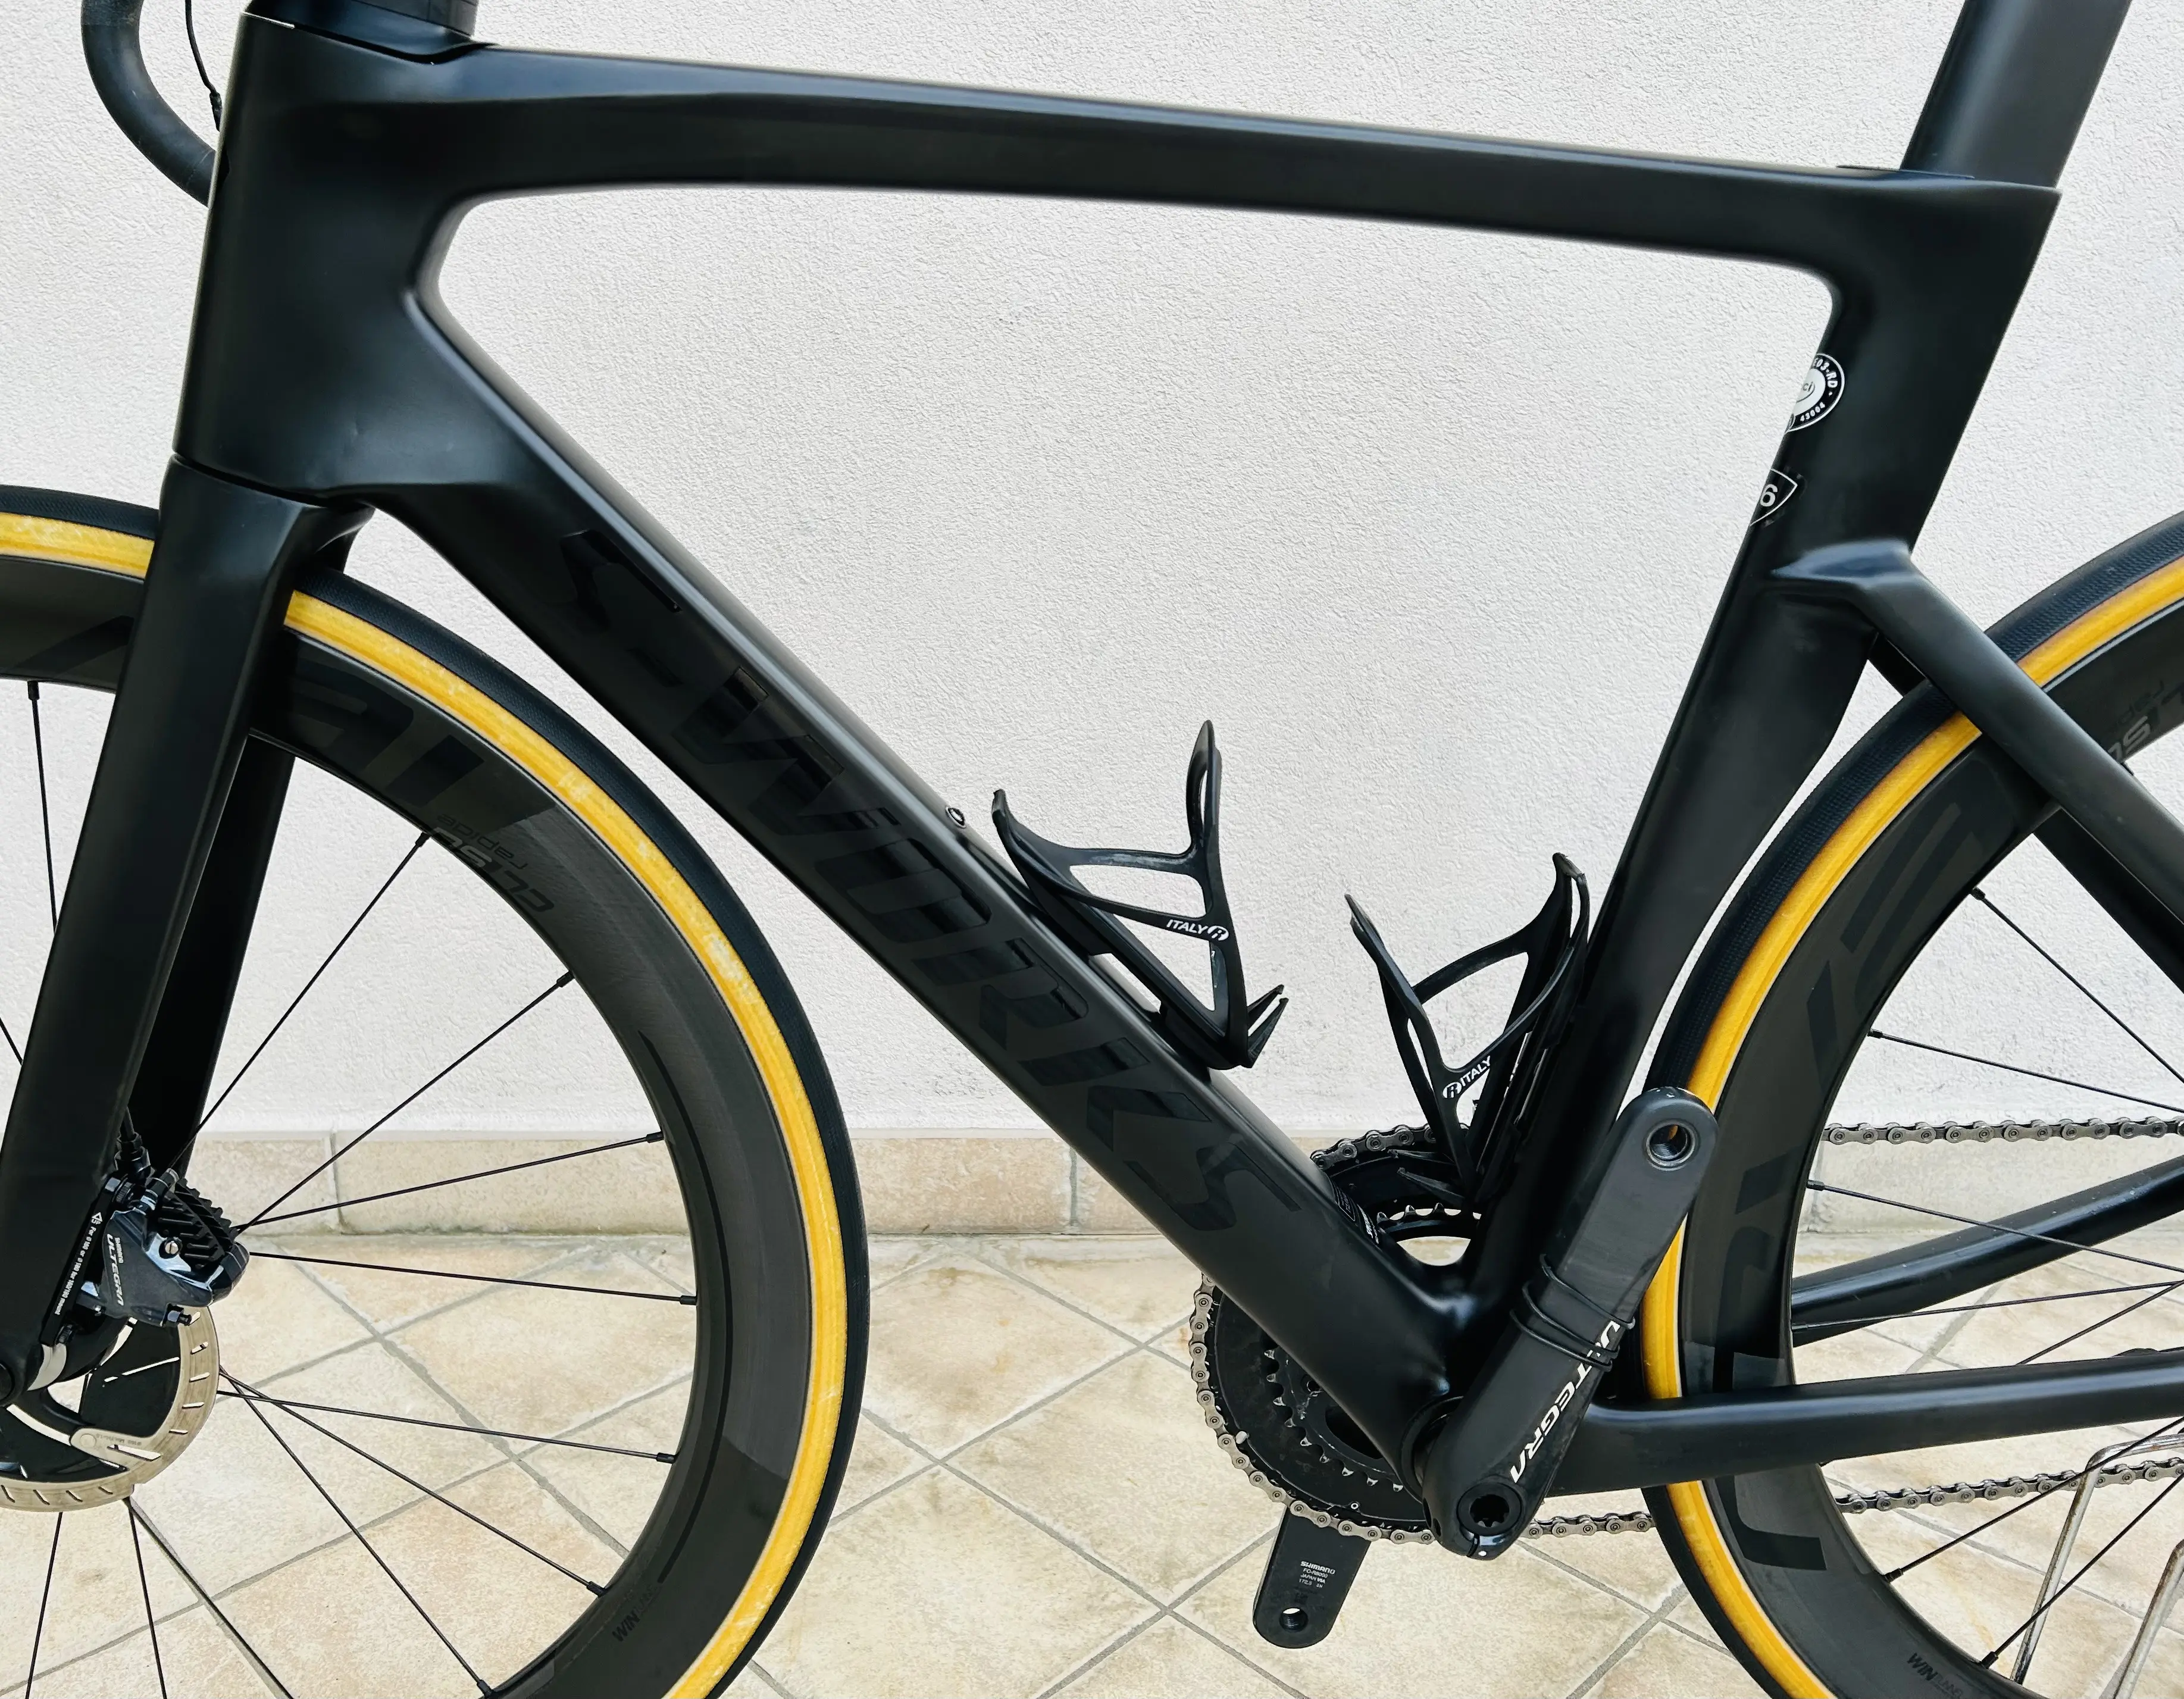 Review: Specialized S-Works Venge Di2